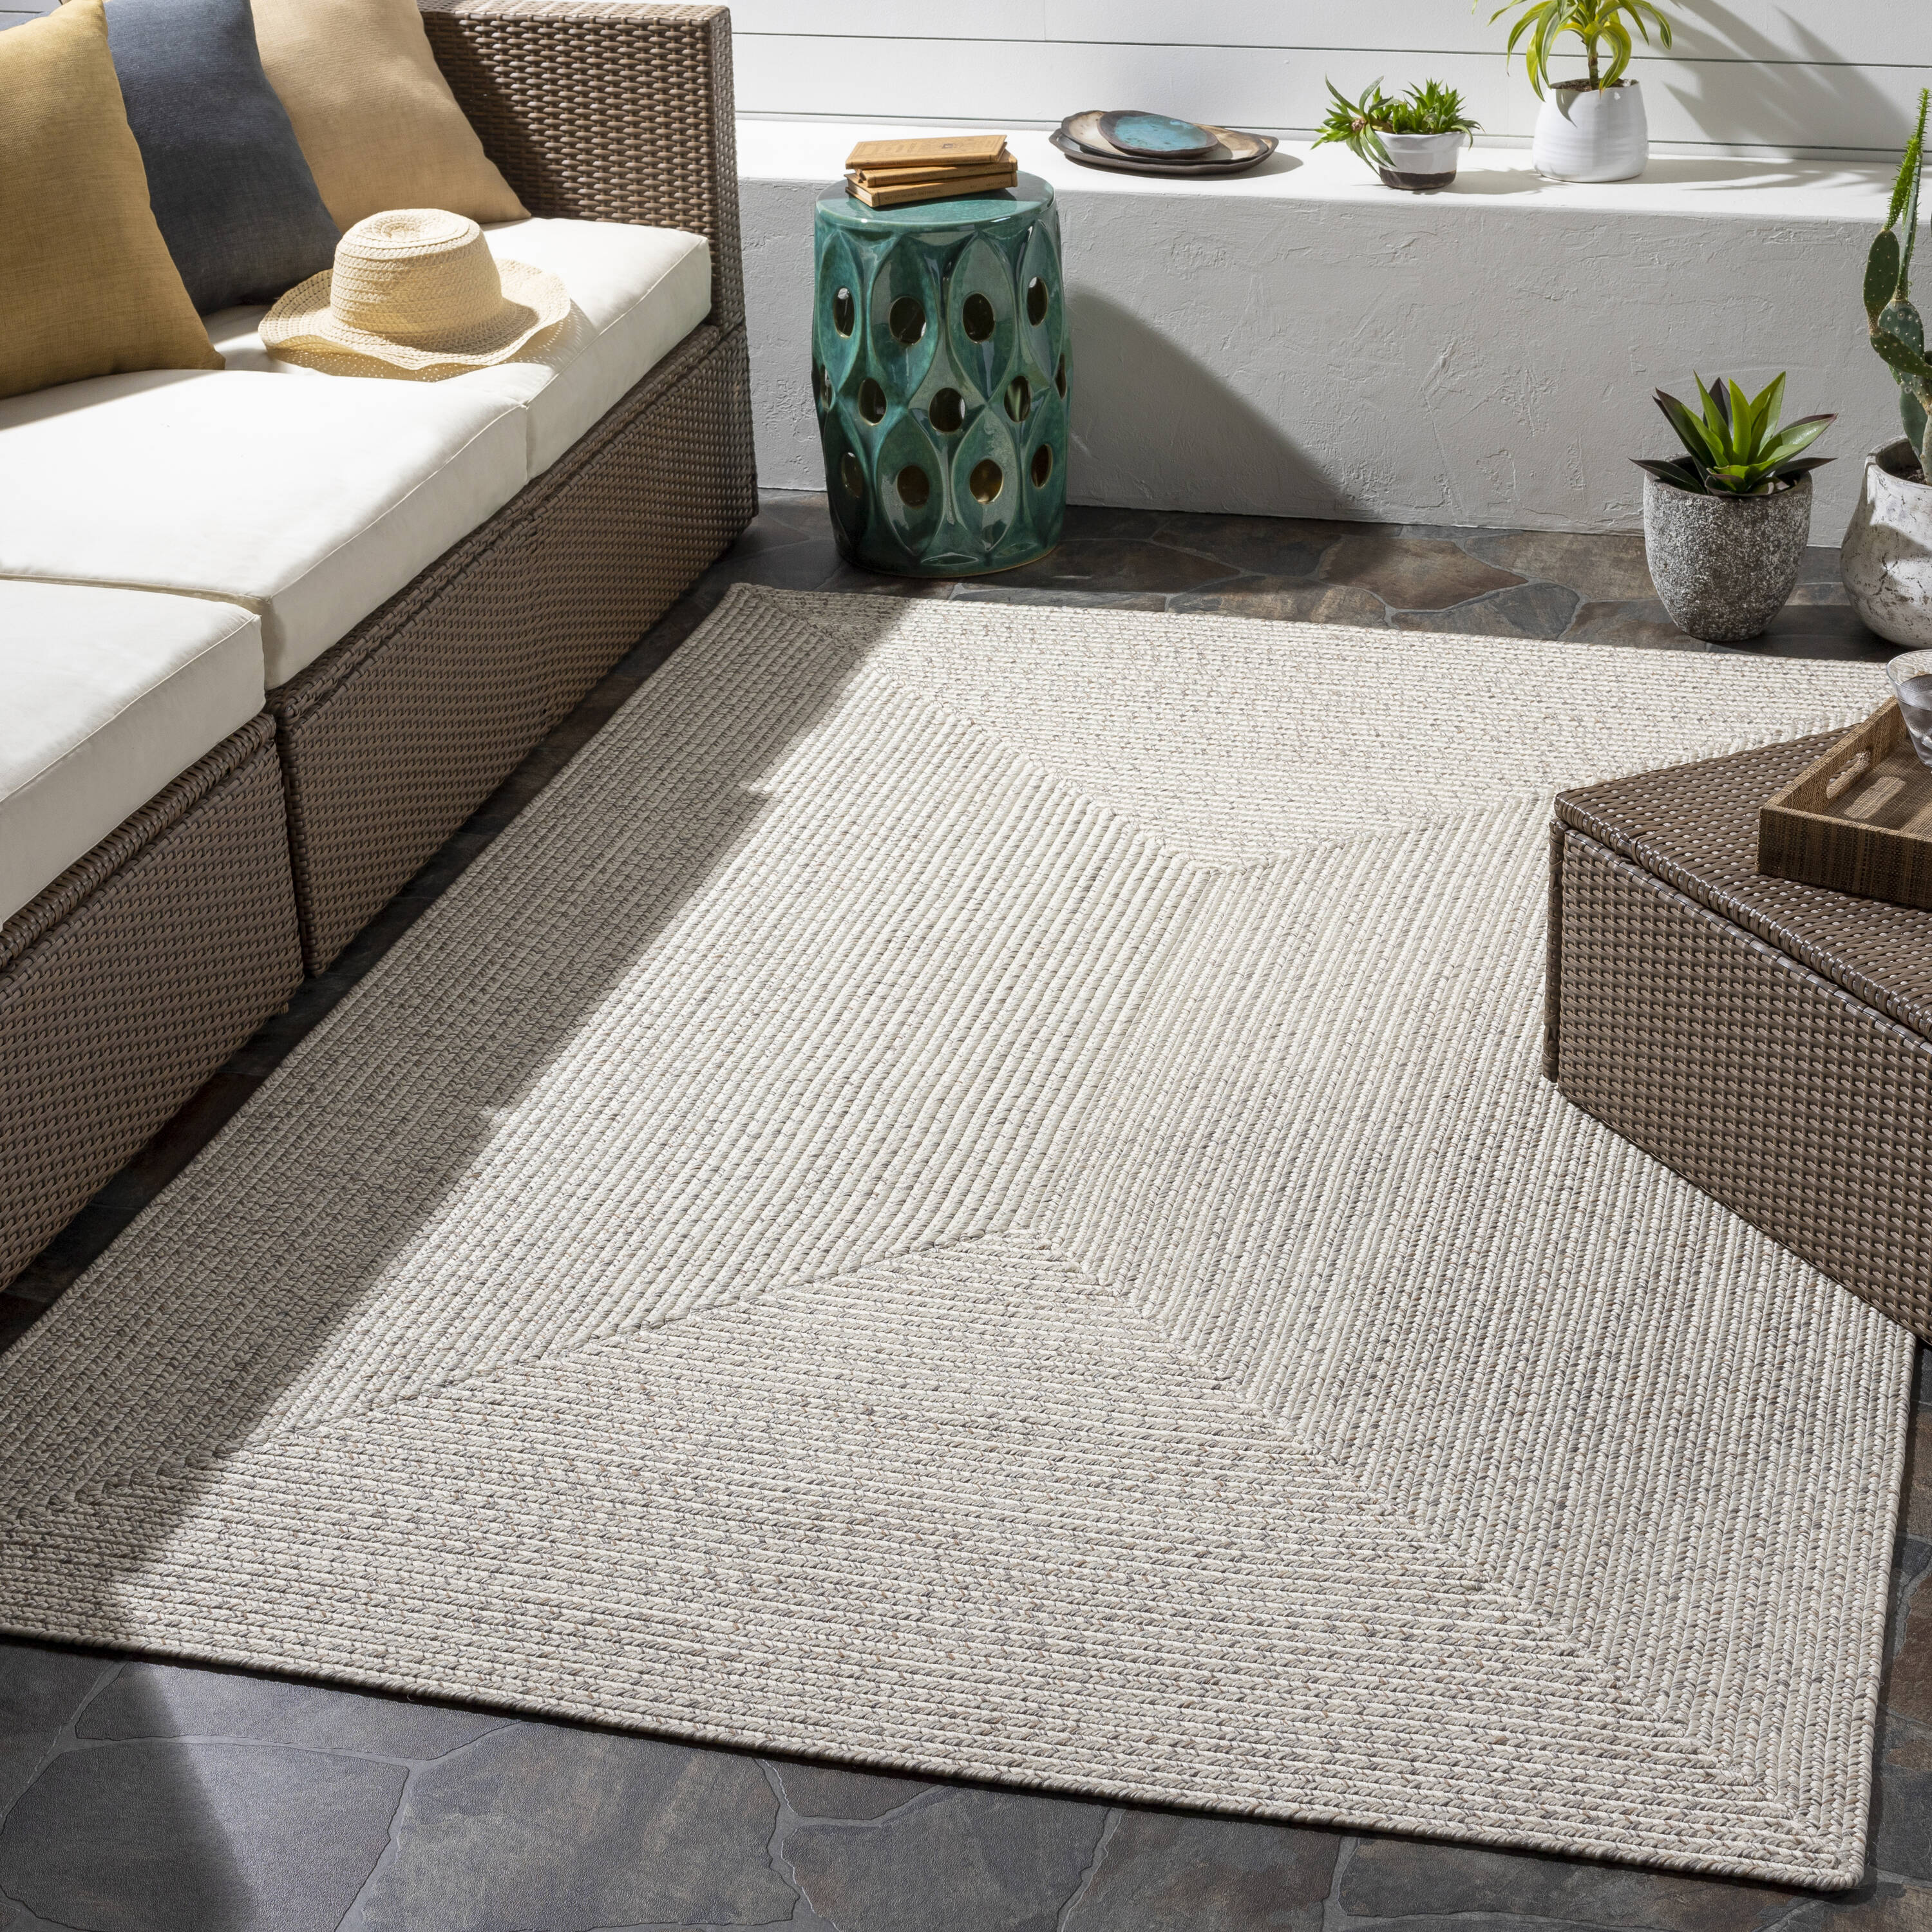 High Quality Heavy Duty Outdoor/Indoor Custom Size Carpet Runner Rug with  Non-Slip PVC Backing - Water Resistant- 36'' or 42'' wide-Runner Rugs for